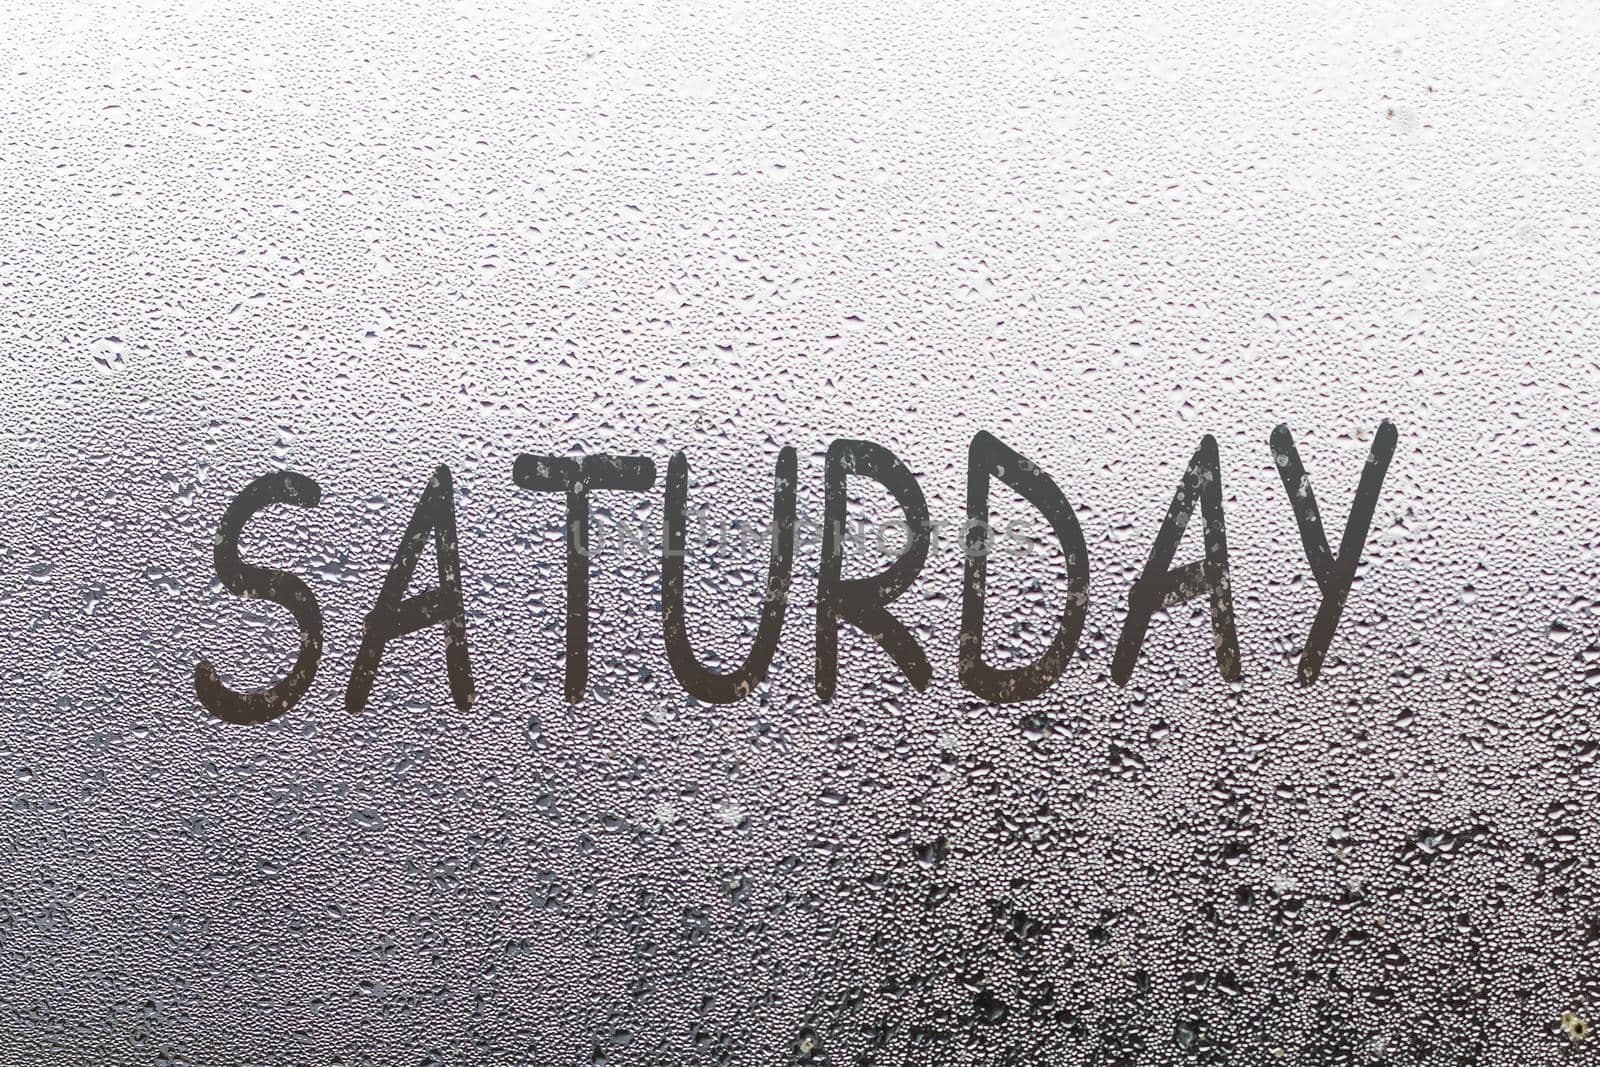 saturday written on the glass screen with raindrops background